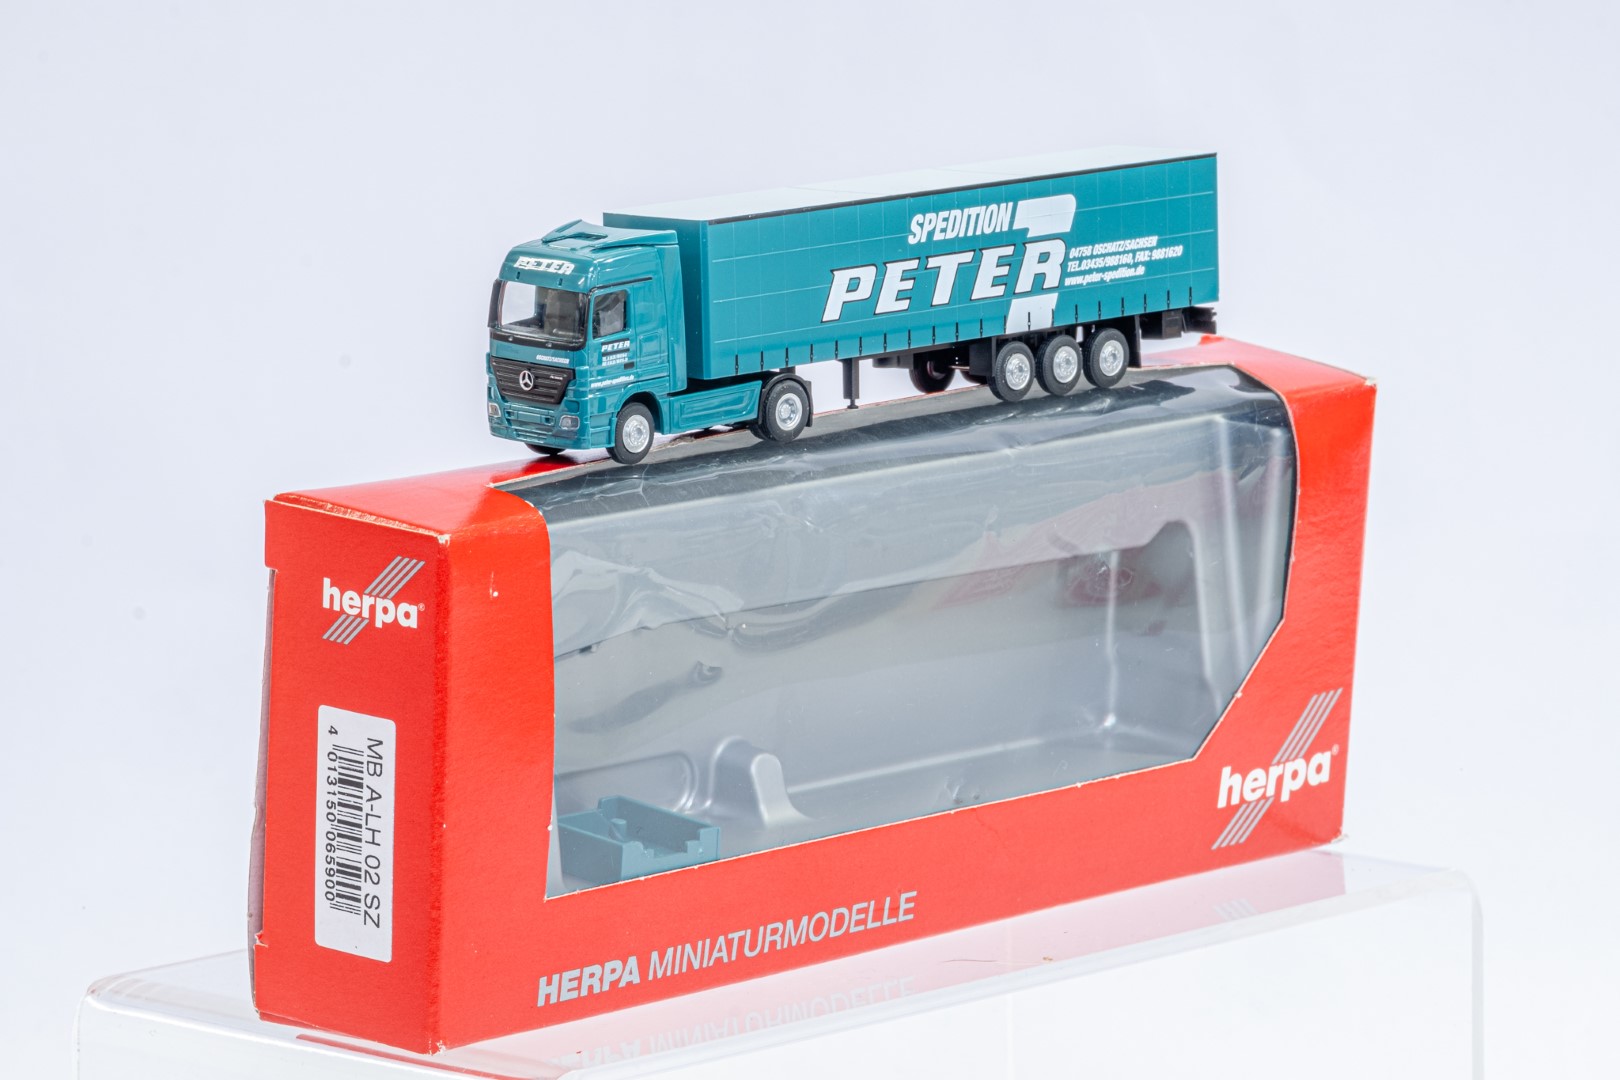 Herpa Merc Actros Box Trailer - Peter Spedition - Image 3 of 8